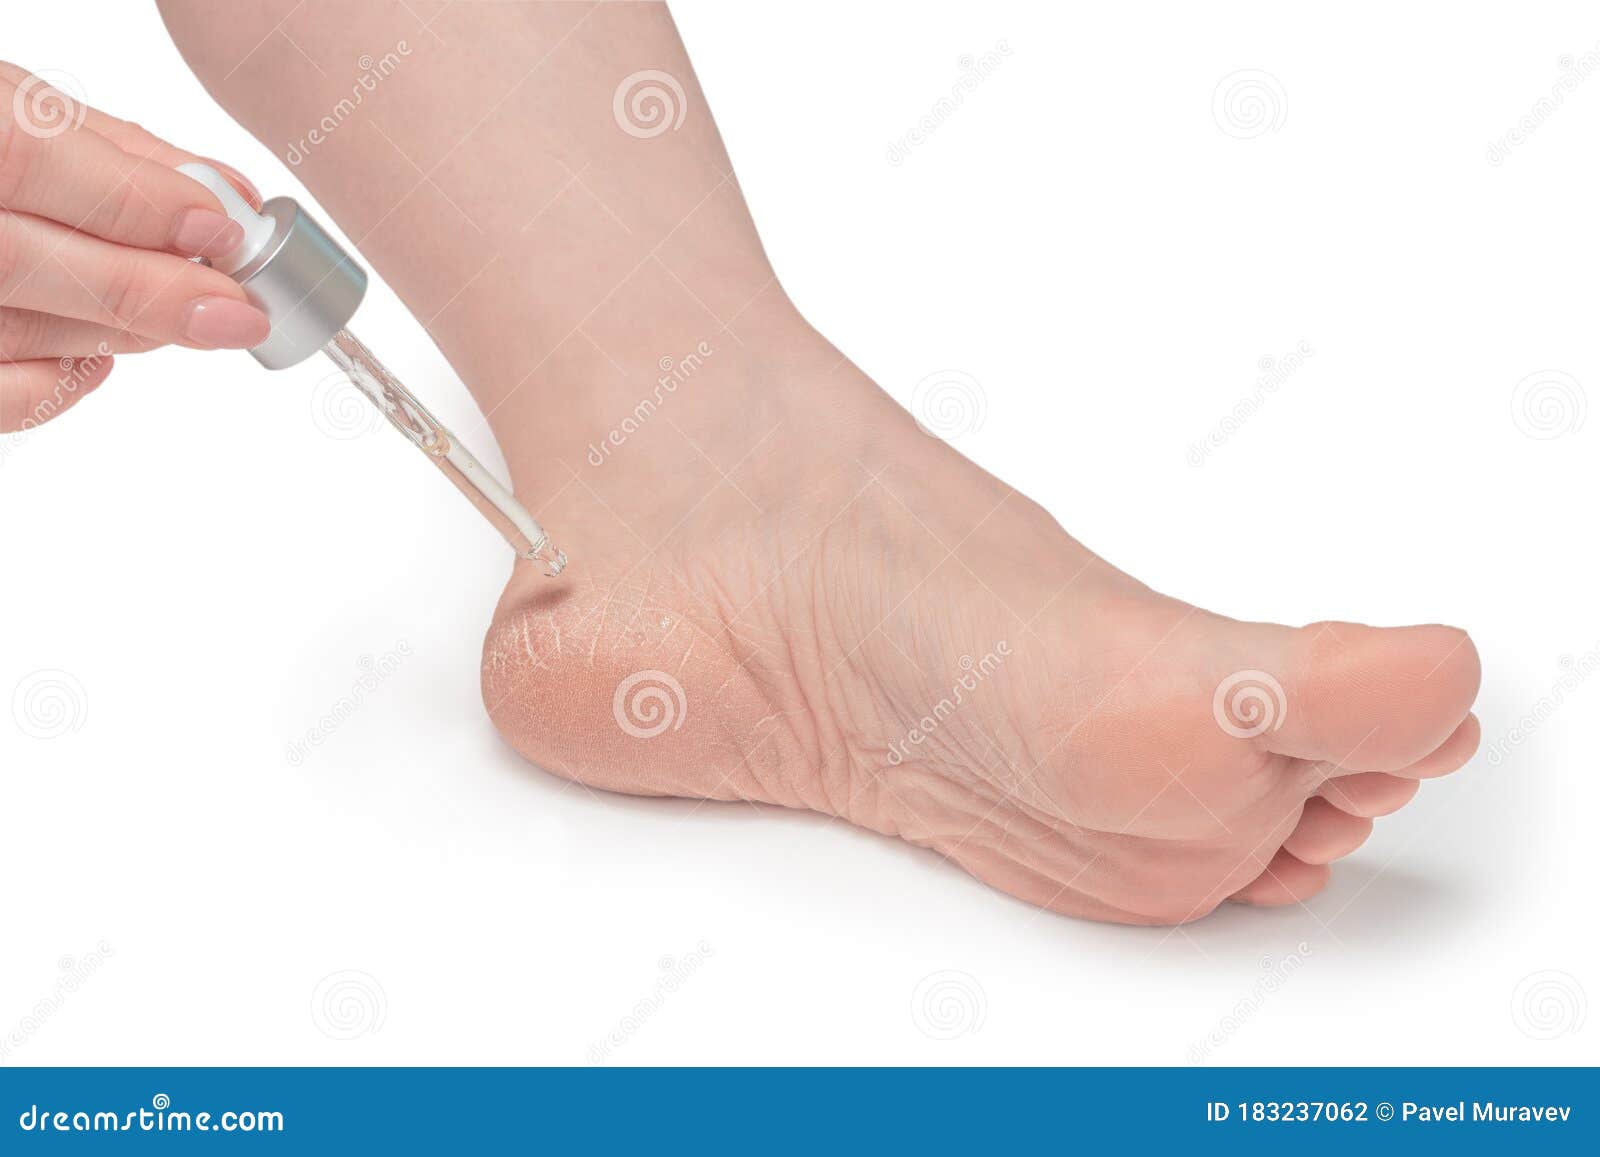 Feet with dry skin before and after treatment.... - Stock Photo [95796000]  - PIXTA